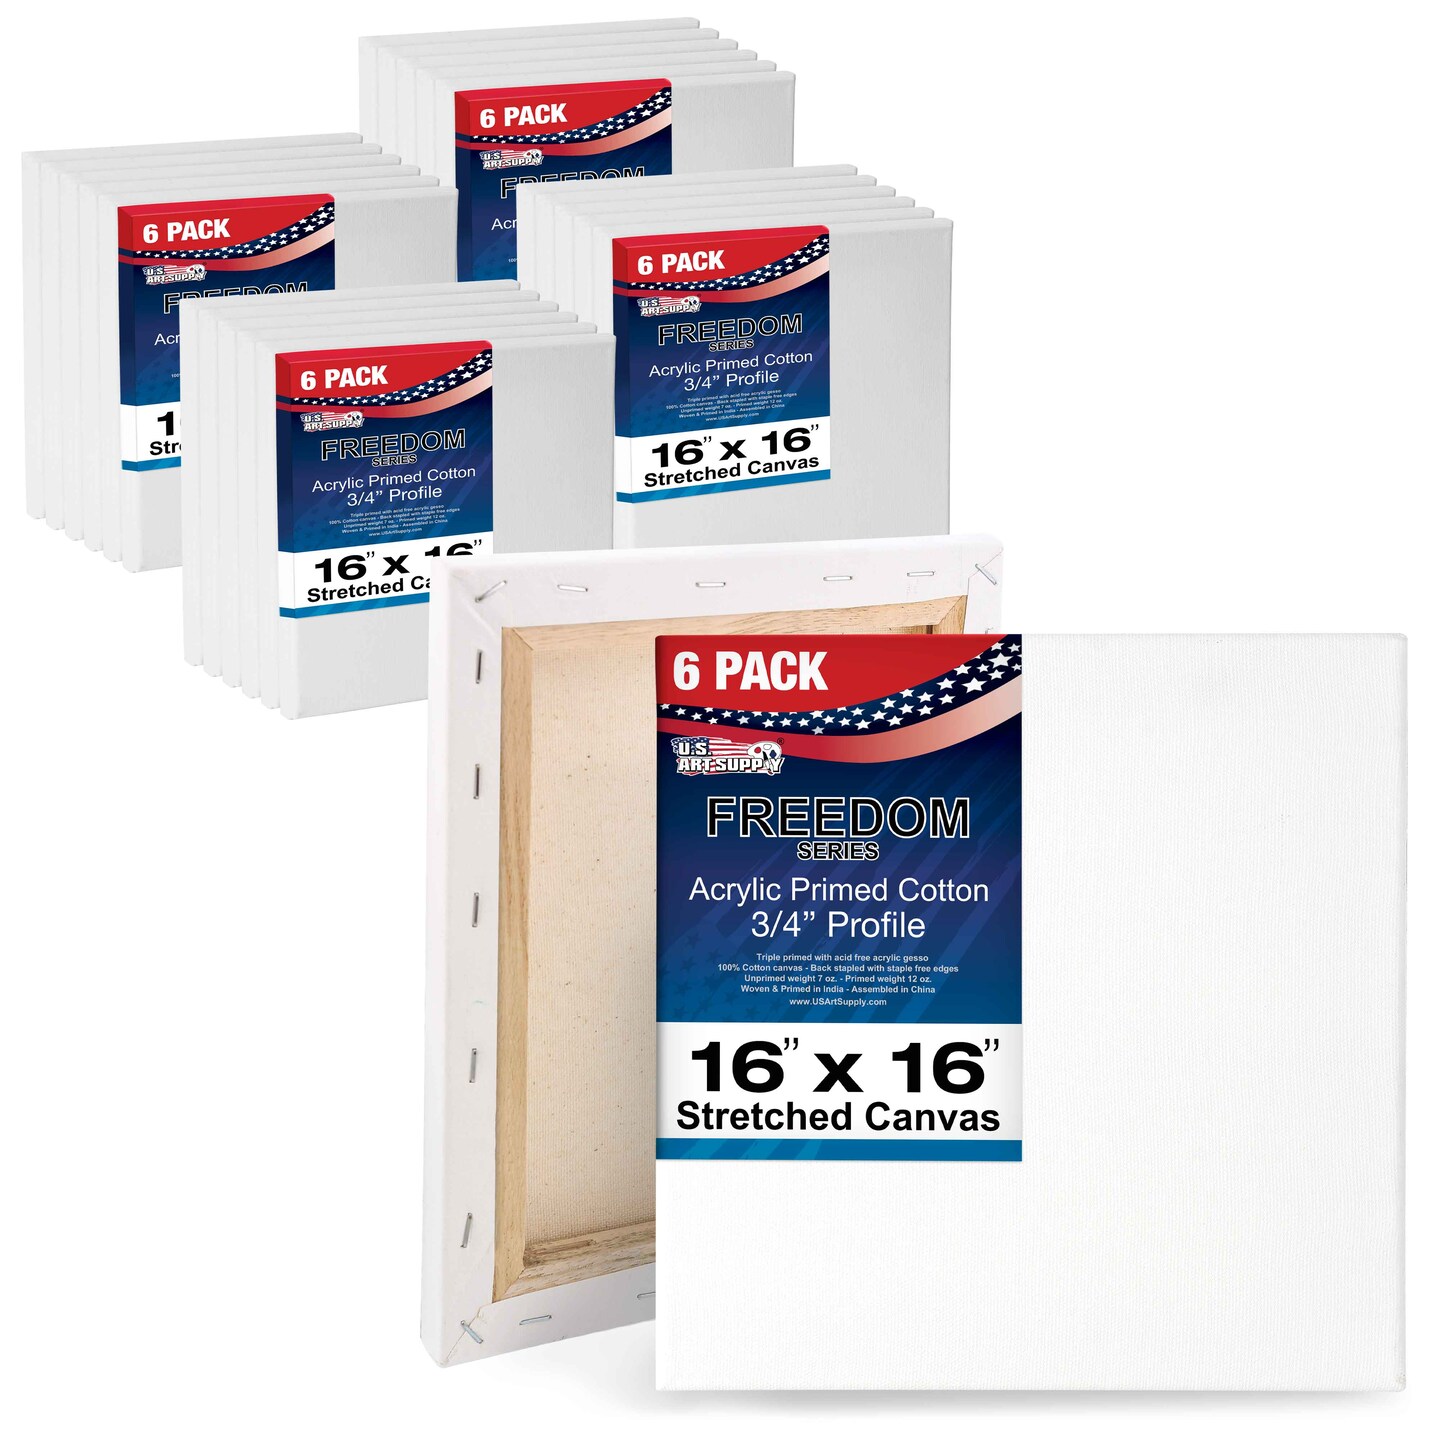 US Art Supply 4 x 4 inch Professional Quality Acid Free Stretched Canvas 6-Pack - 3/4 Profile 12 Ounce Primed Gesso